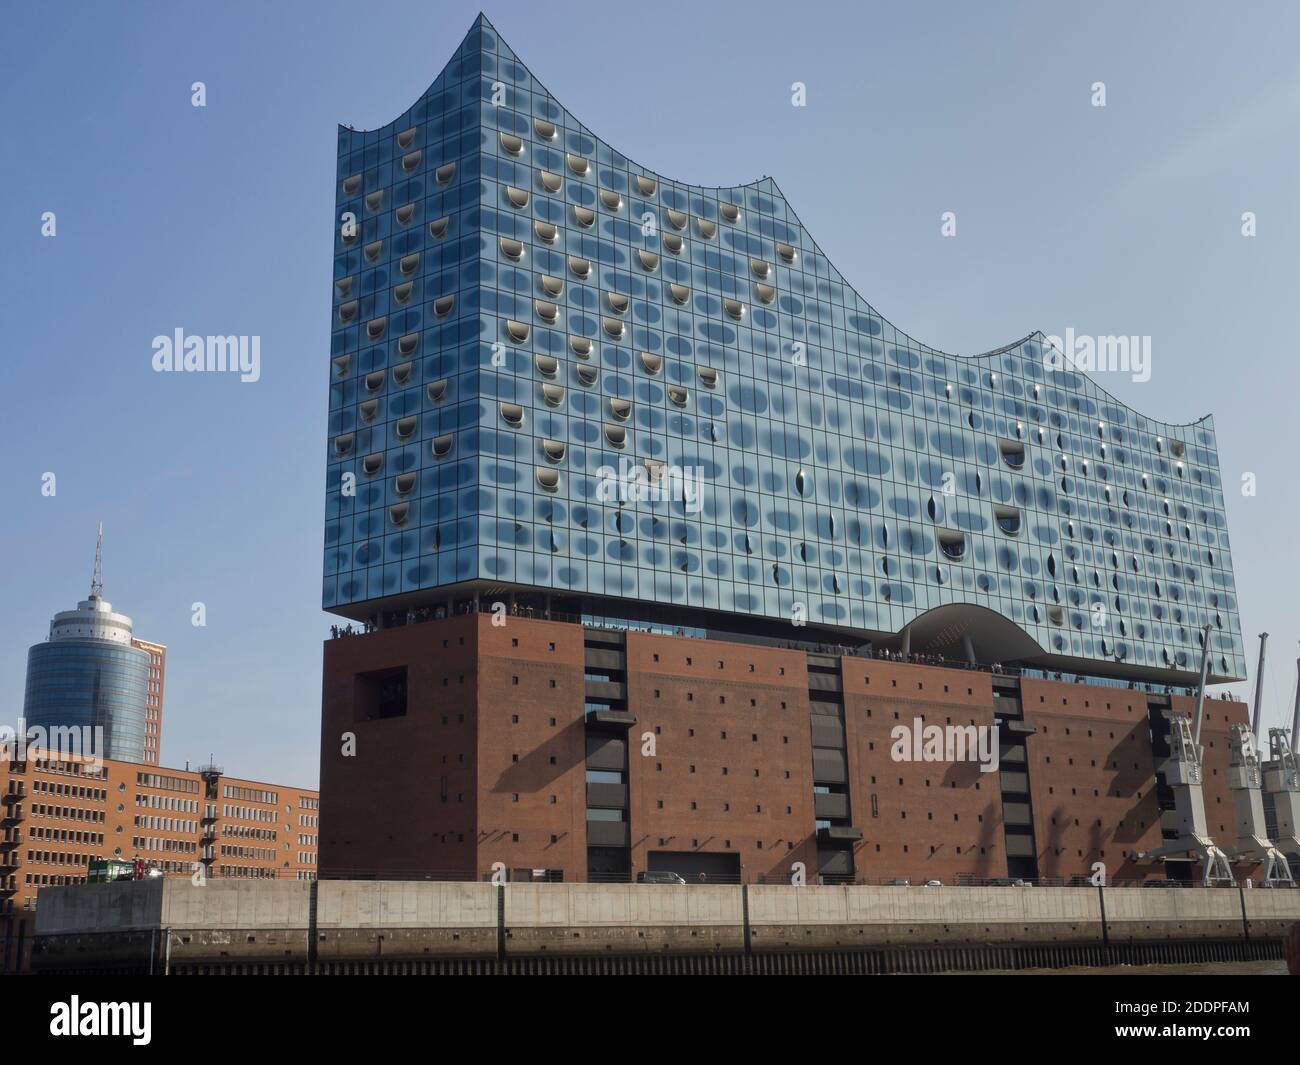 Elbphilharmonie, modern concert hall in Hamburg Germany by the architectHerzog & de Neuron, facade from the river Elbe Stock Photo